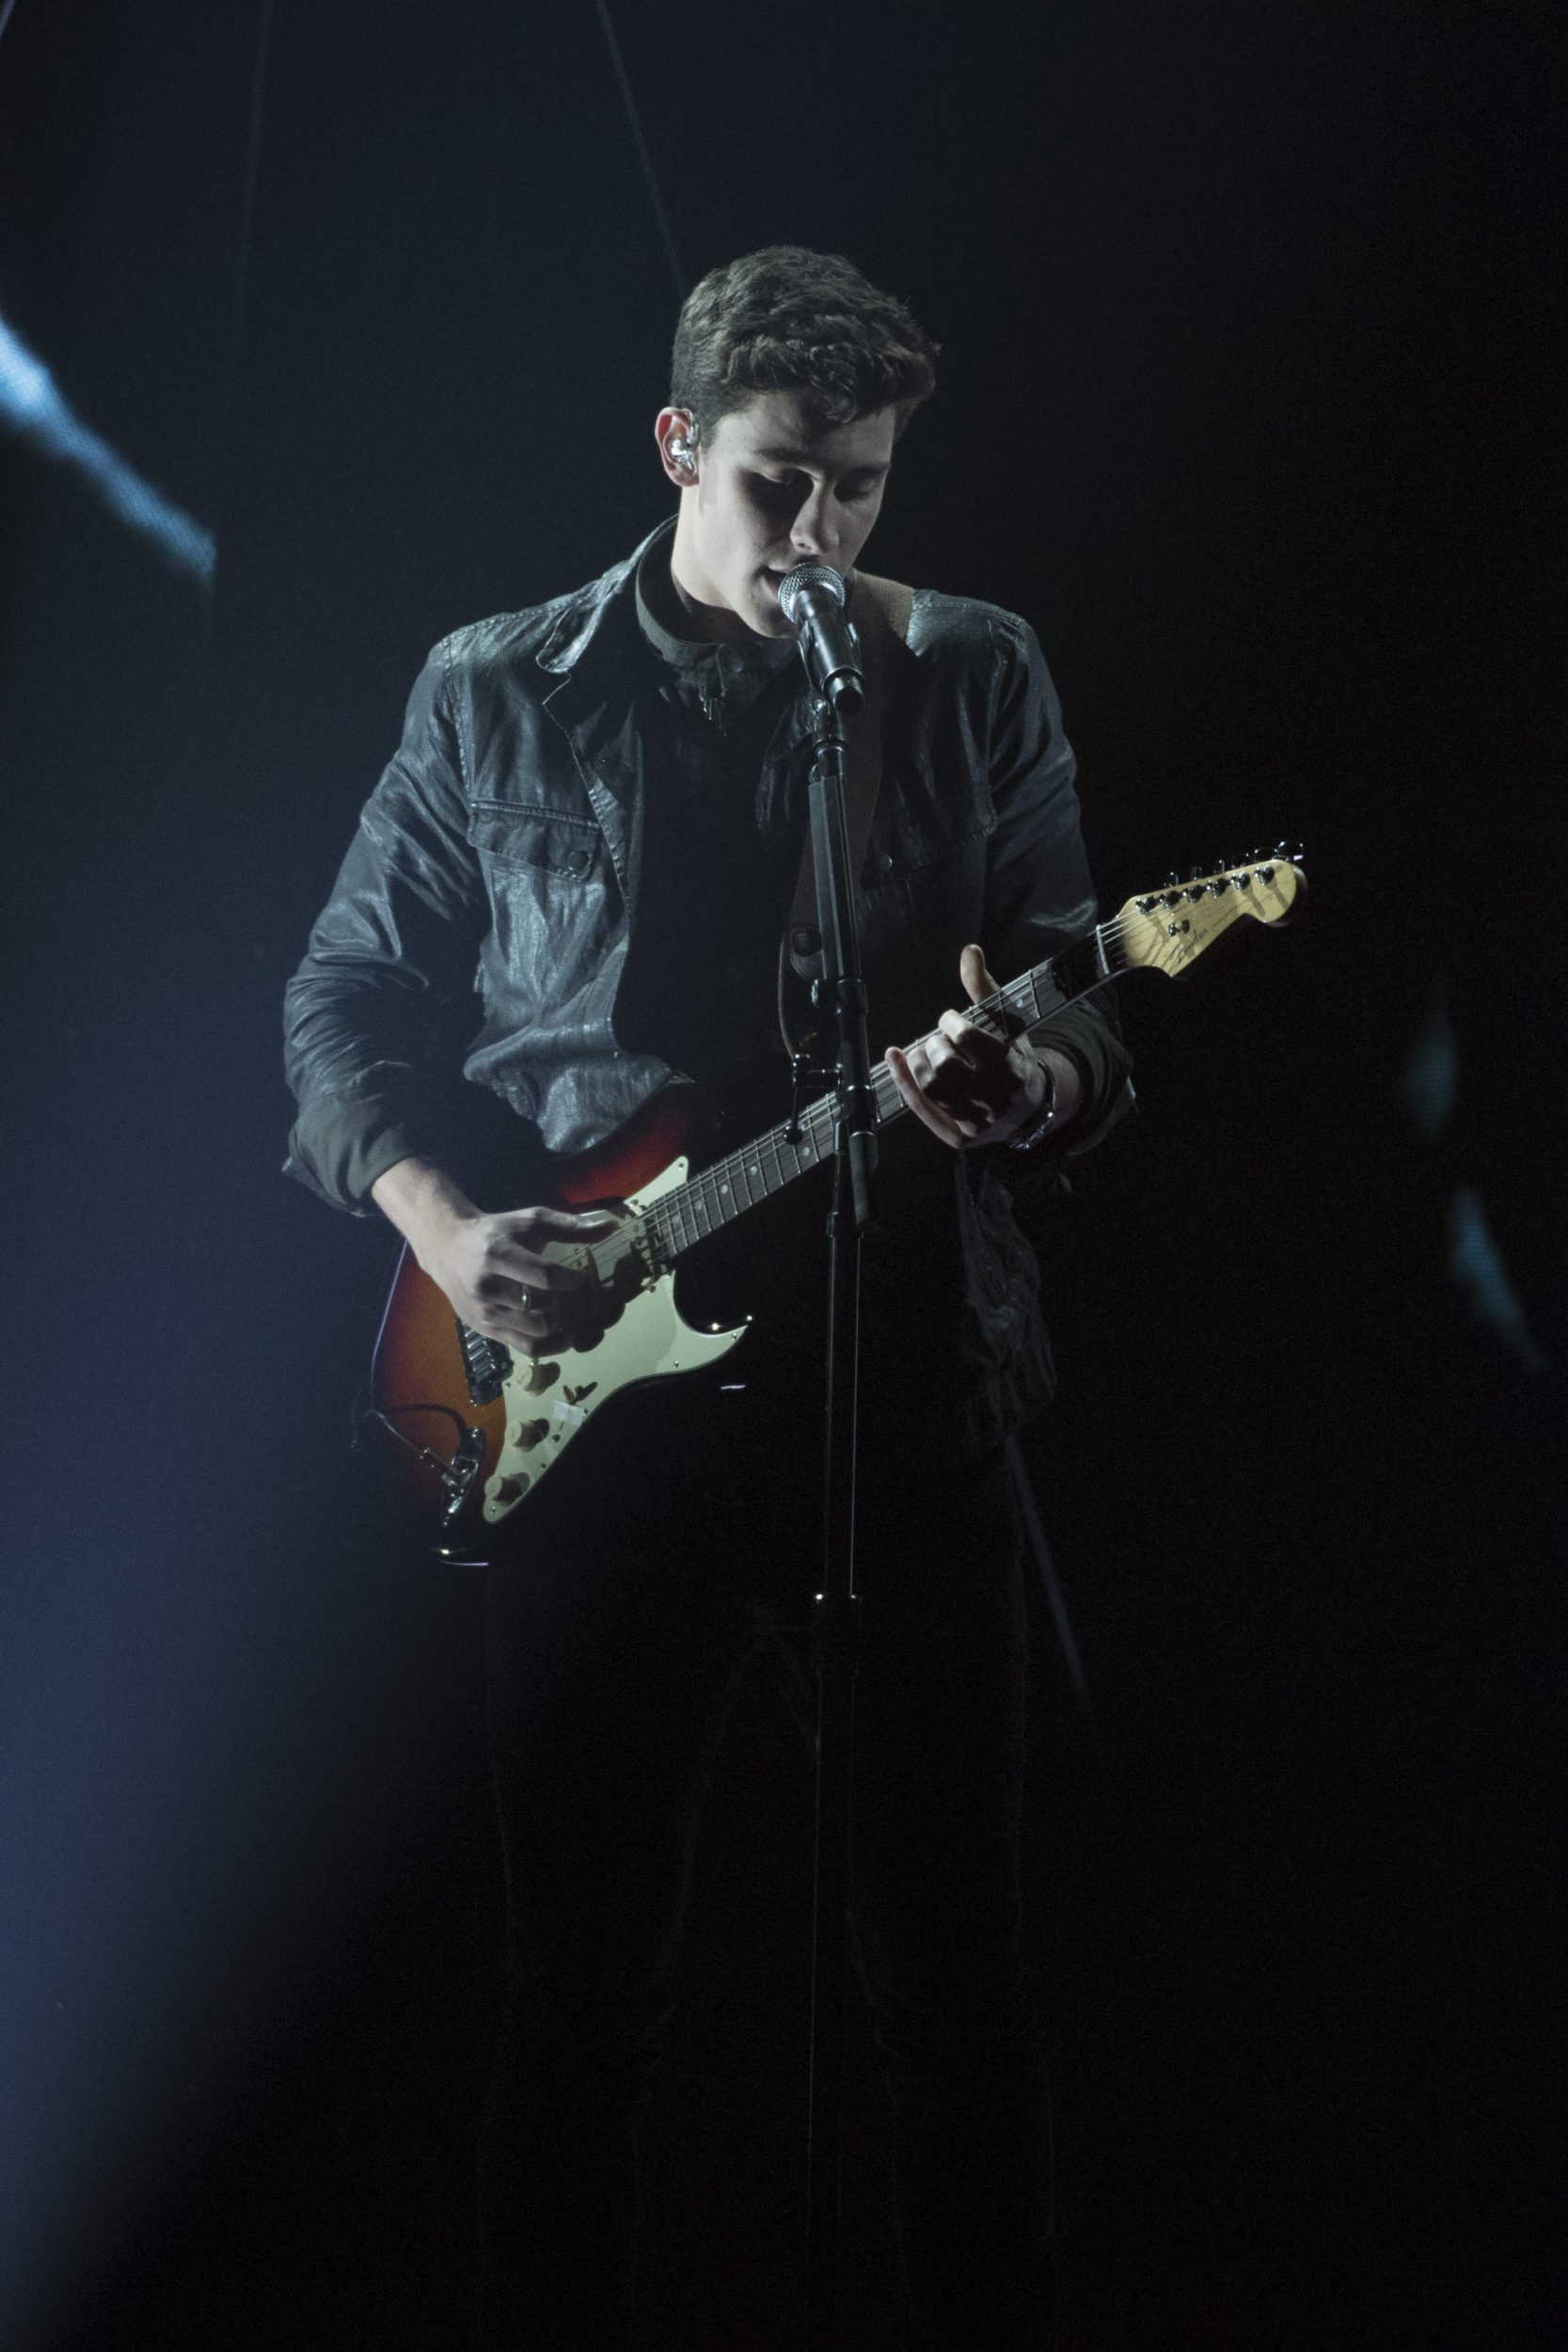 THE 2016 AMERICAN MUSIC AWARDS(r) - The “2016 American Music Awards,” the world’s biggest fan-voted award show, broadcasts live from the Microsoft Theater in Los Angeles on SUNDAY, NOVEMBER 20, at 8:00 p.m. EST, on ABC. (Image Group LA/ABC) SHAWN MENDES